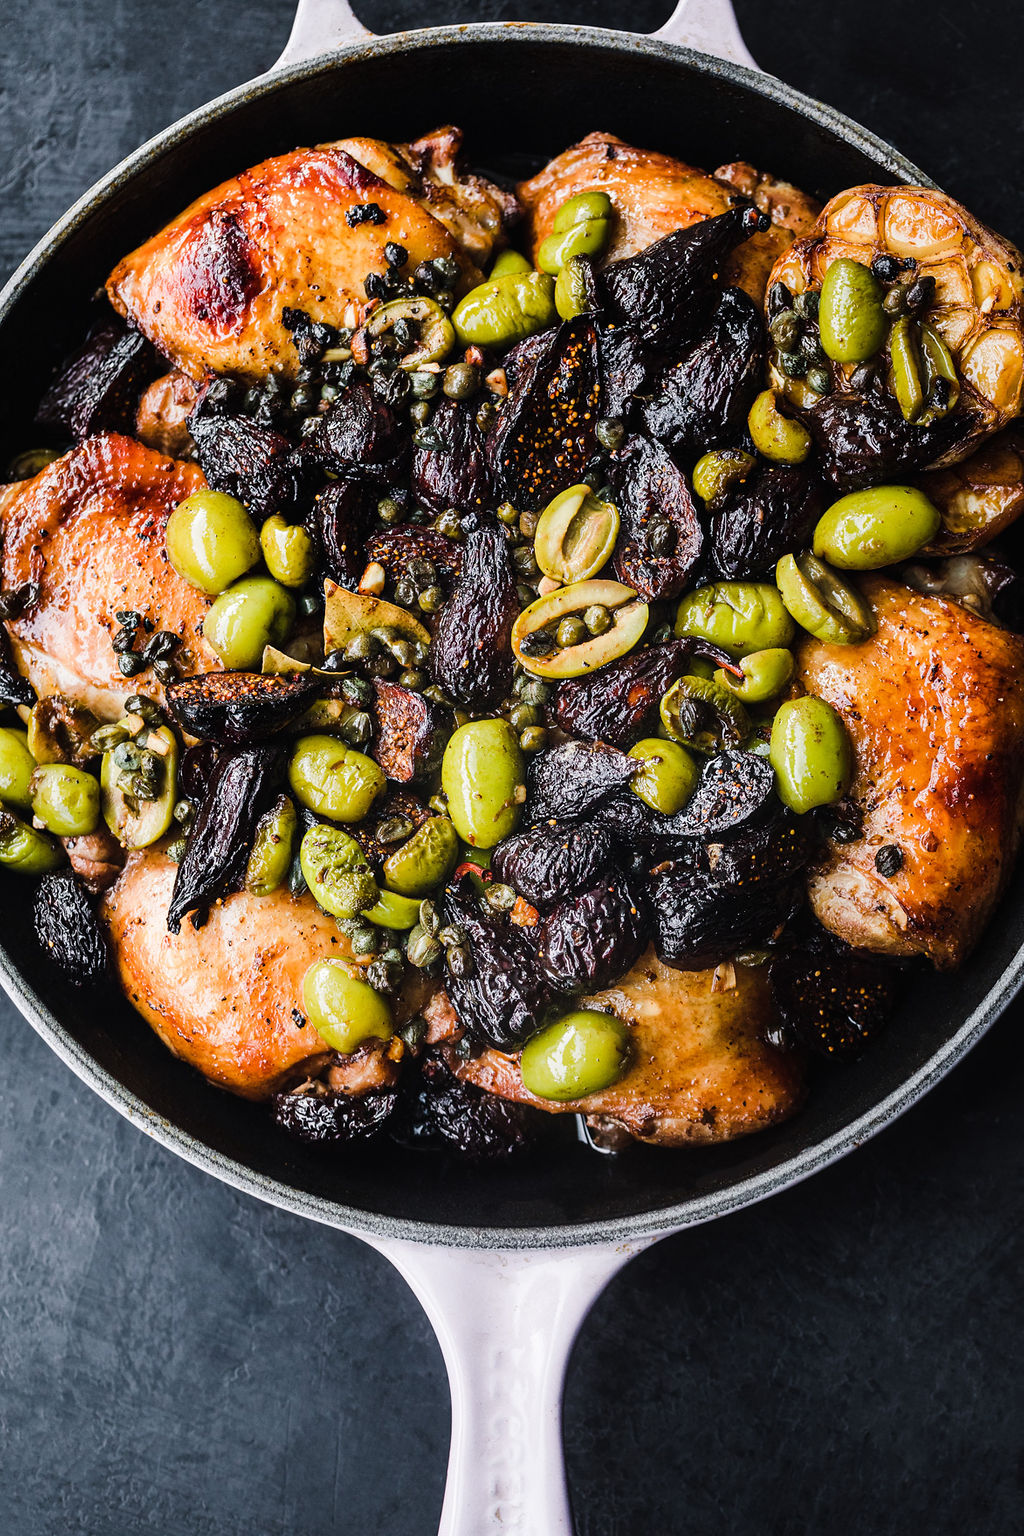 Chicken marbella with olives and figs is deceptively easy to make. Marinate the fig chicken thighs and then bake for feel-good comfort food.